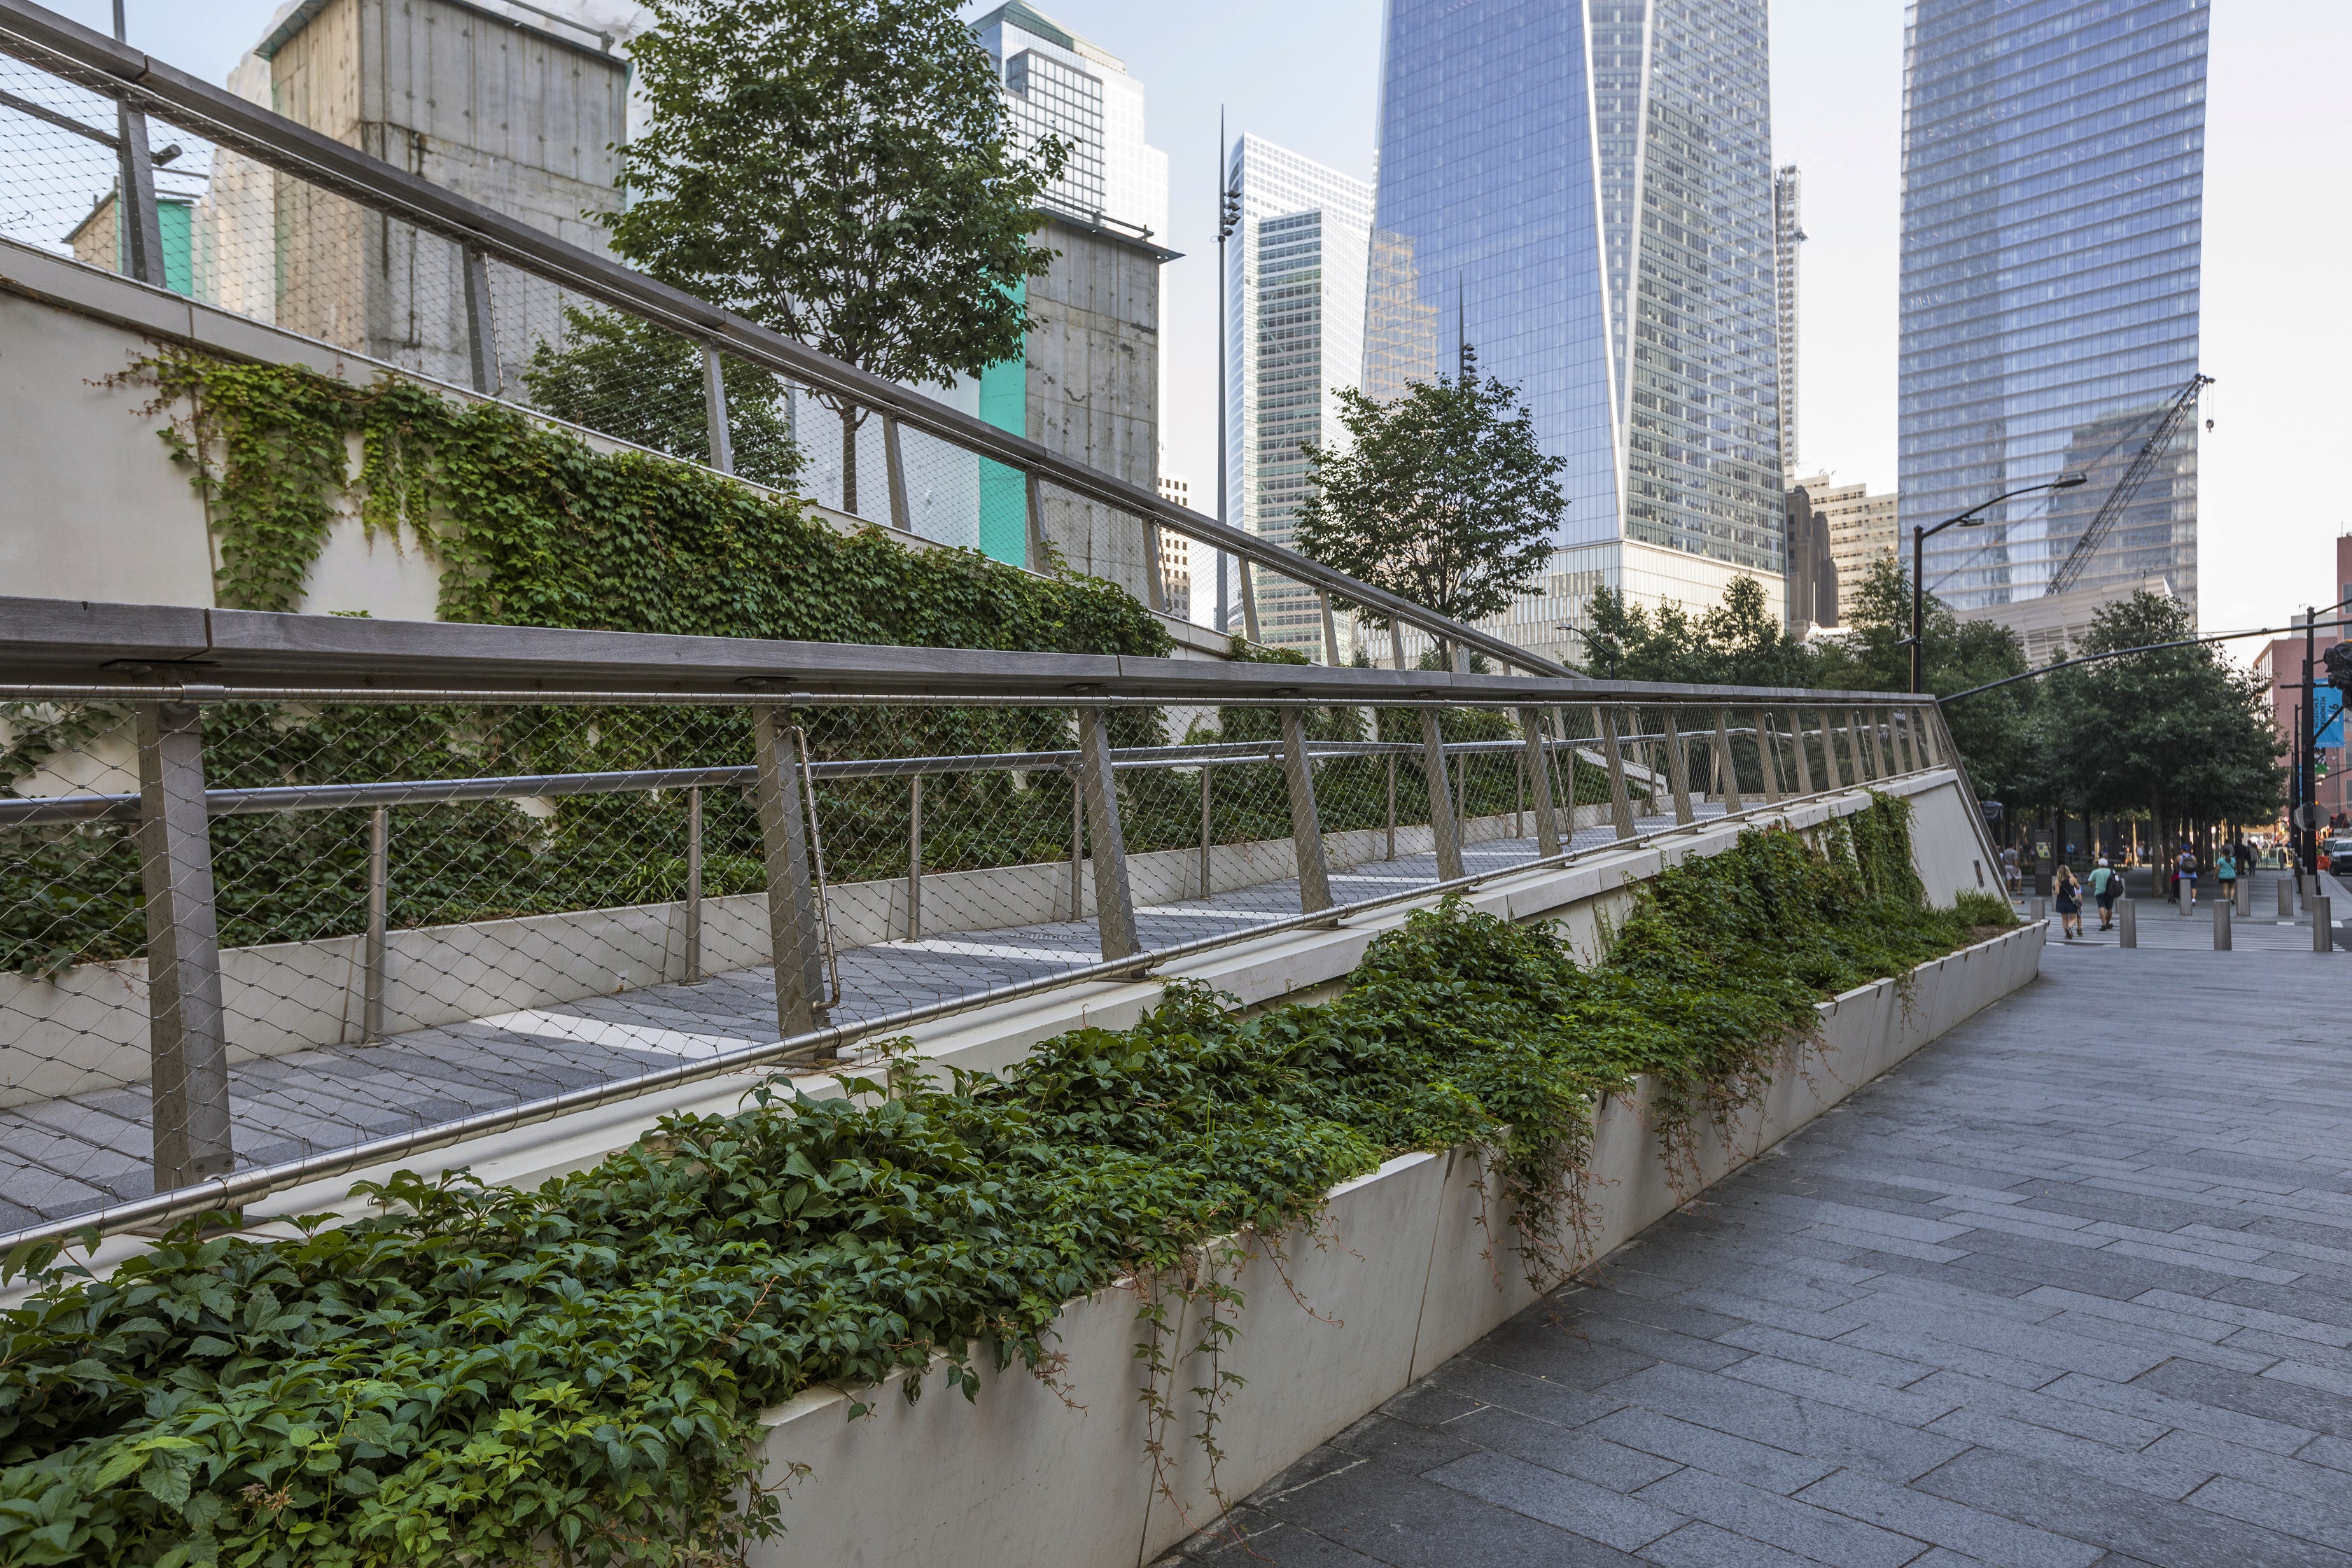 The sharp angles and clean lines cutting through this one-acre elevated park encourages passersby to stop and reflect.